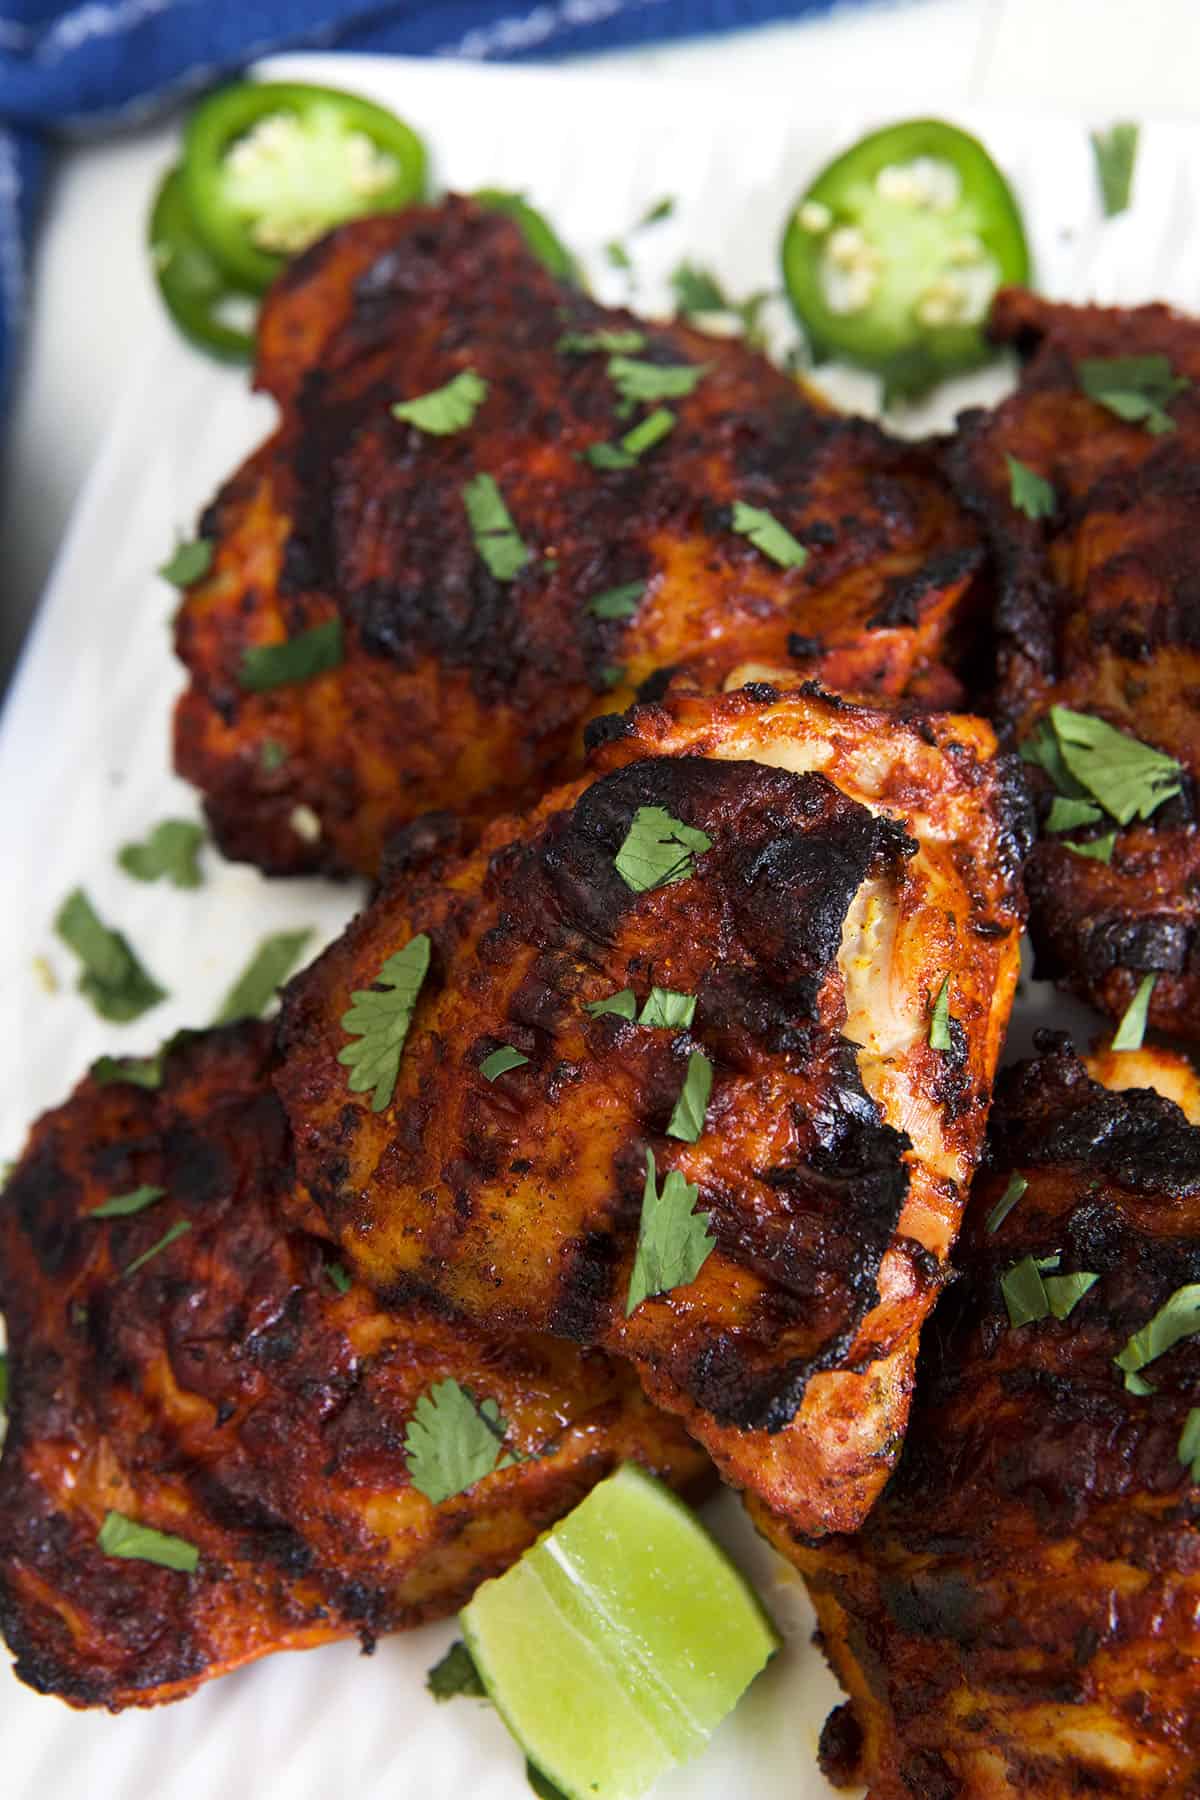 Cilantro, limes, and jalapenos are placed on and around cooked pollo asado.